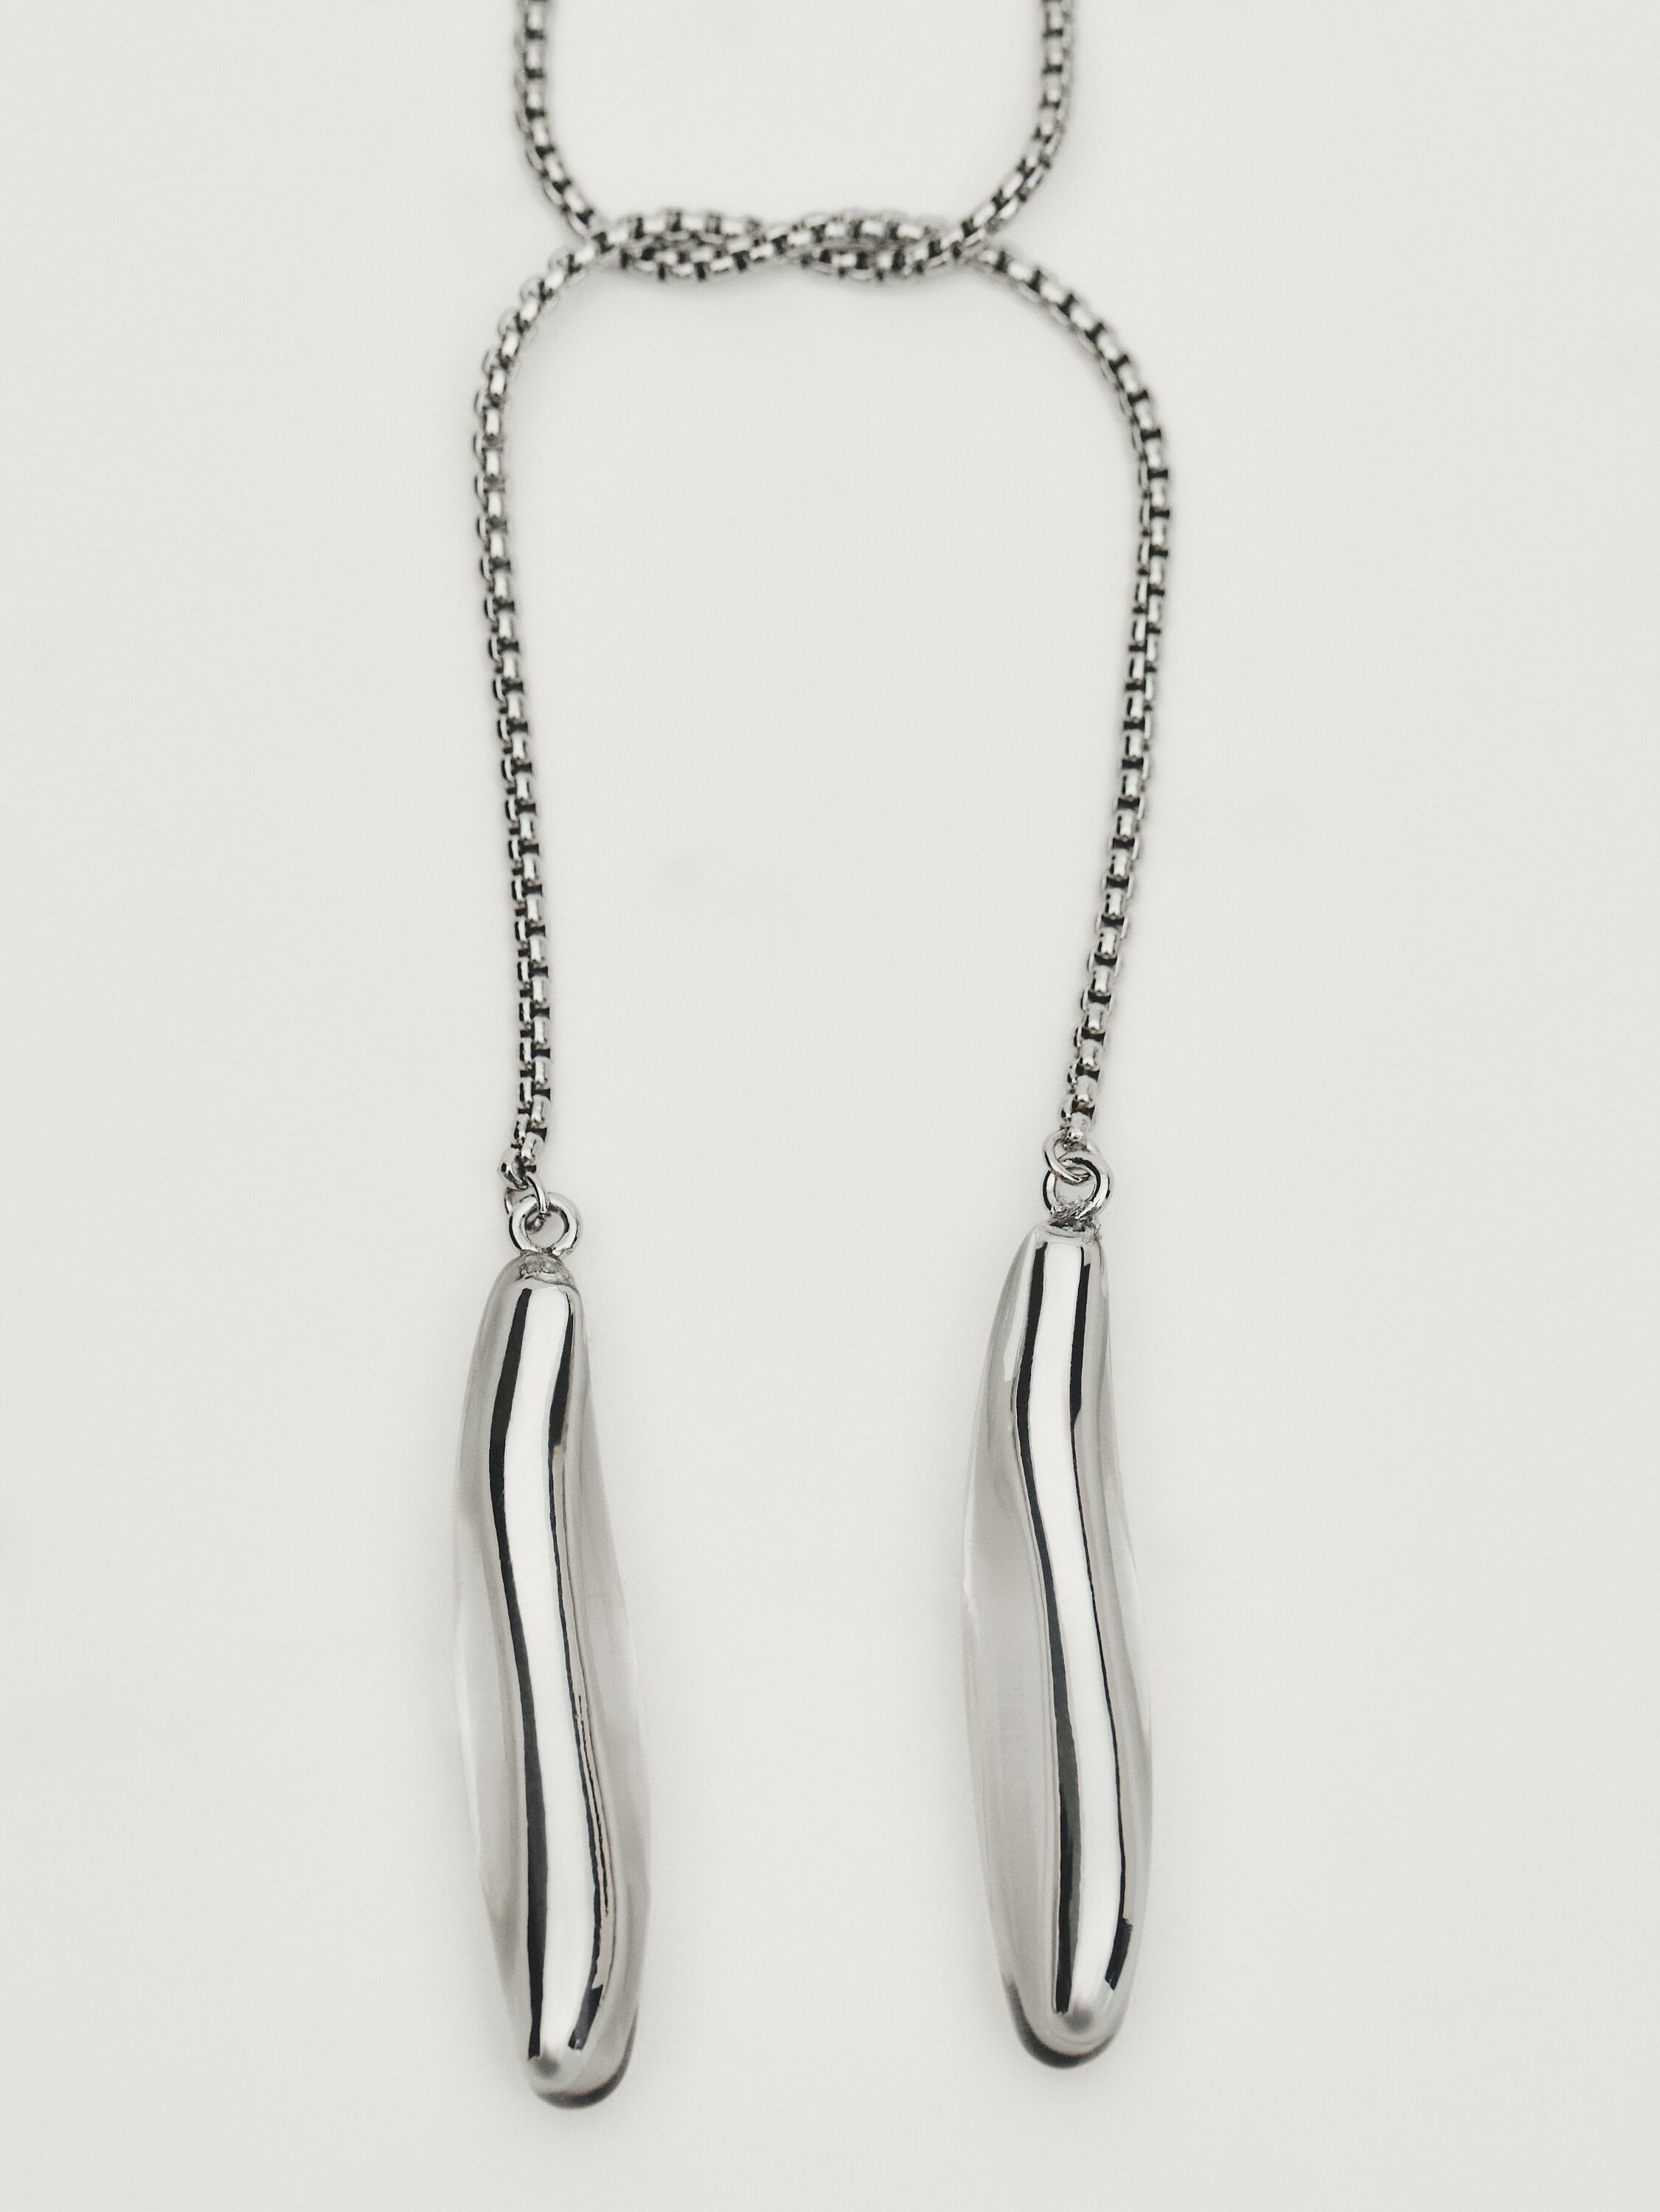 Long teardrop necklace with twist detail - Limited Edition